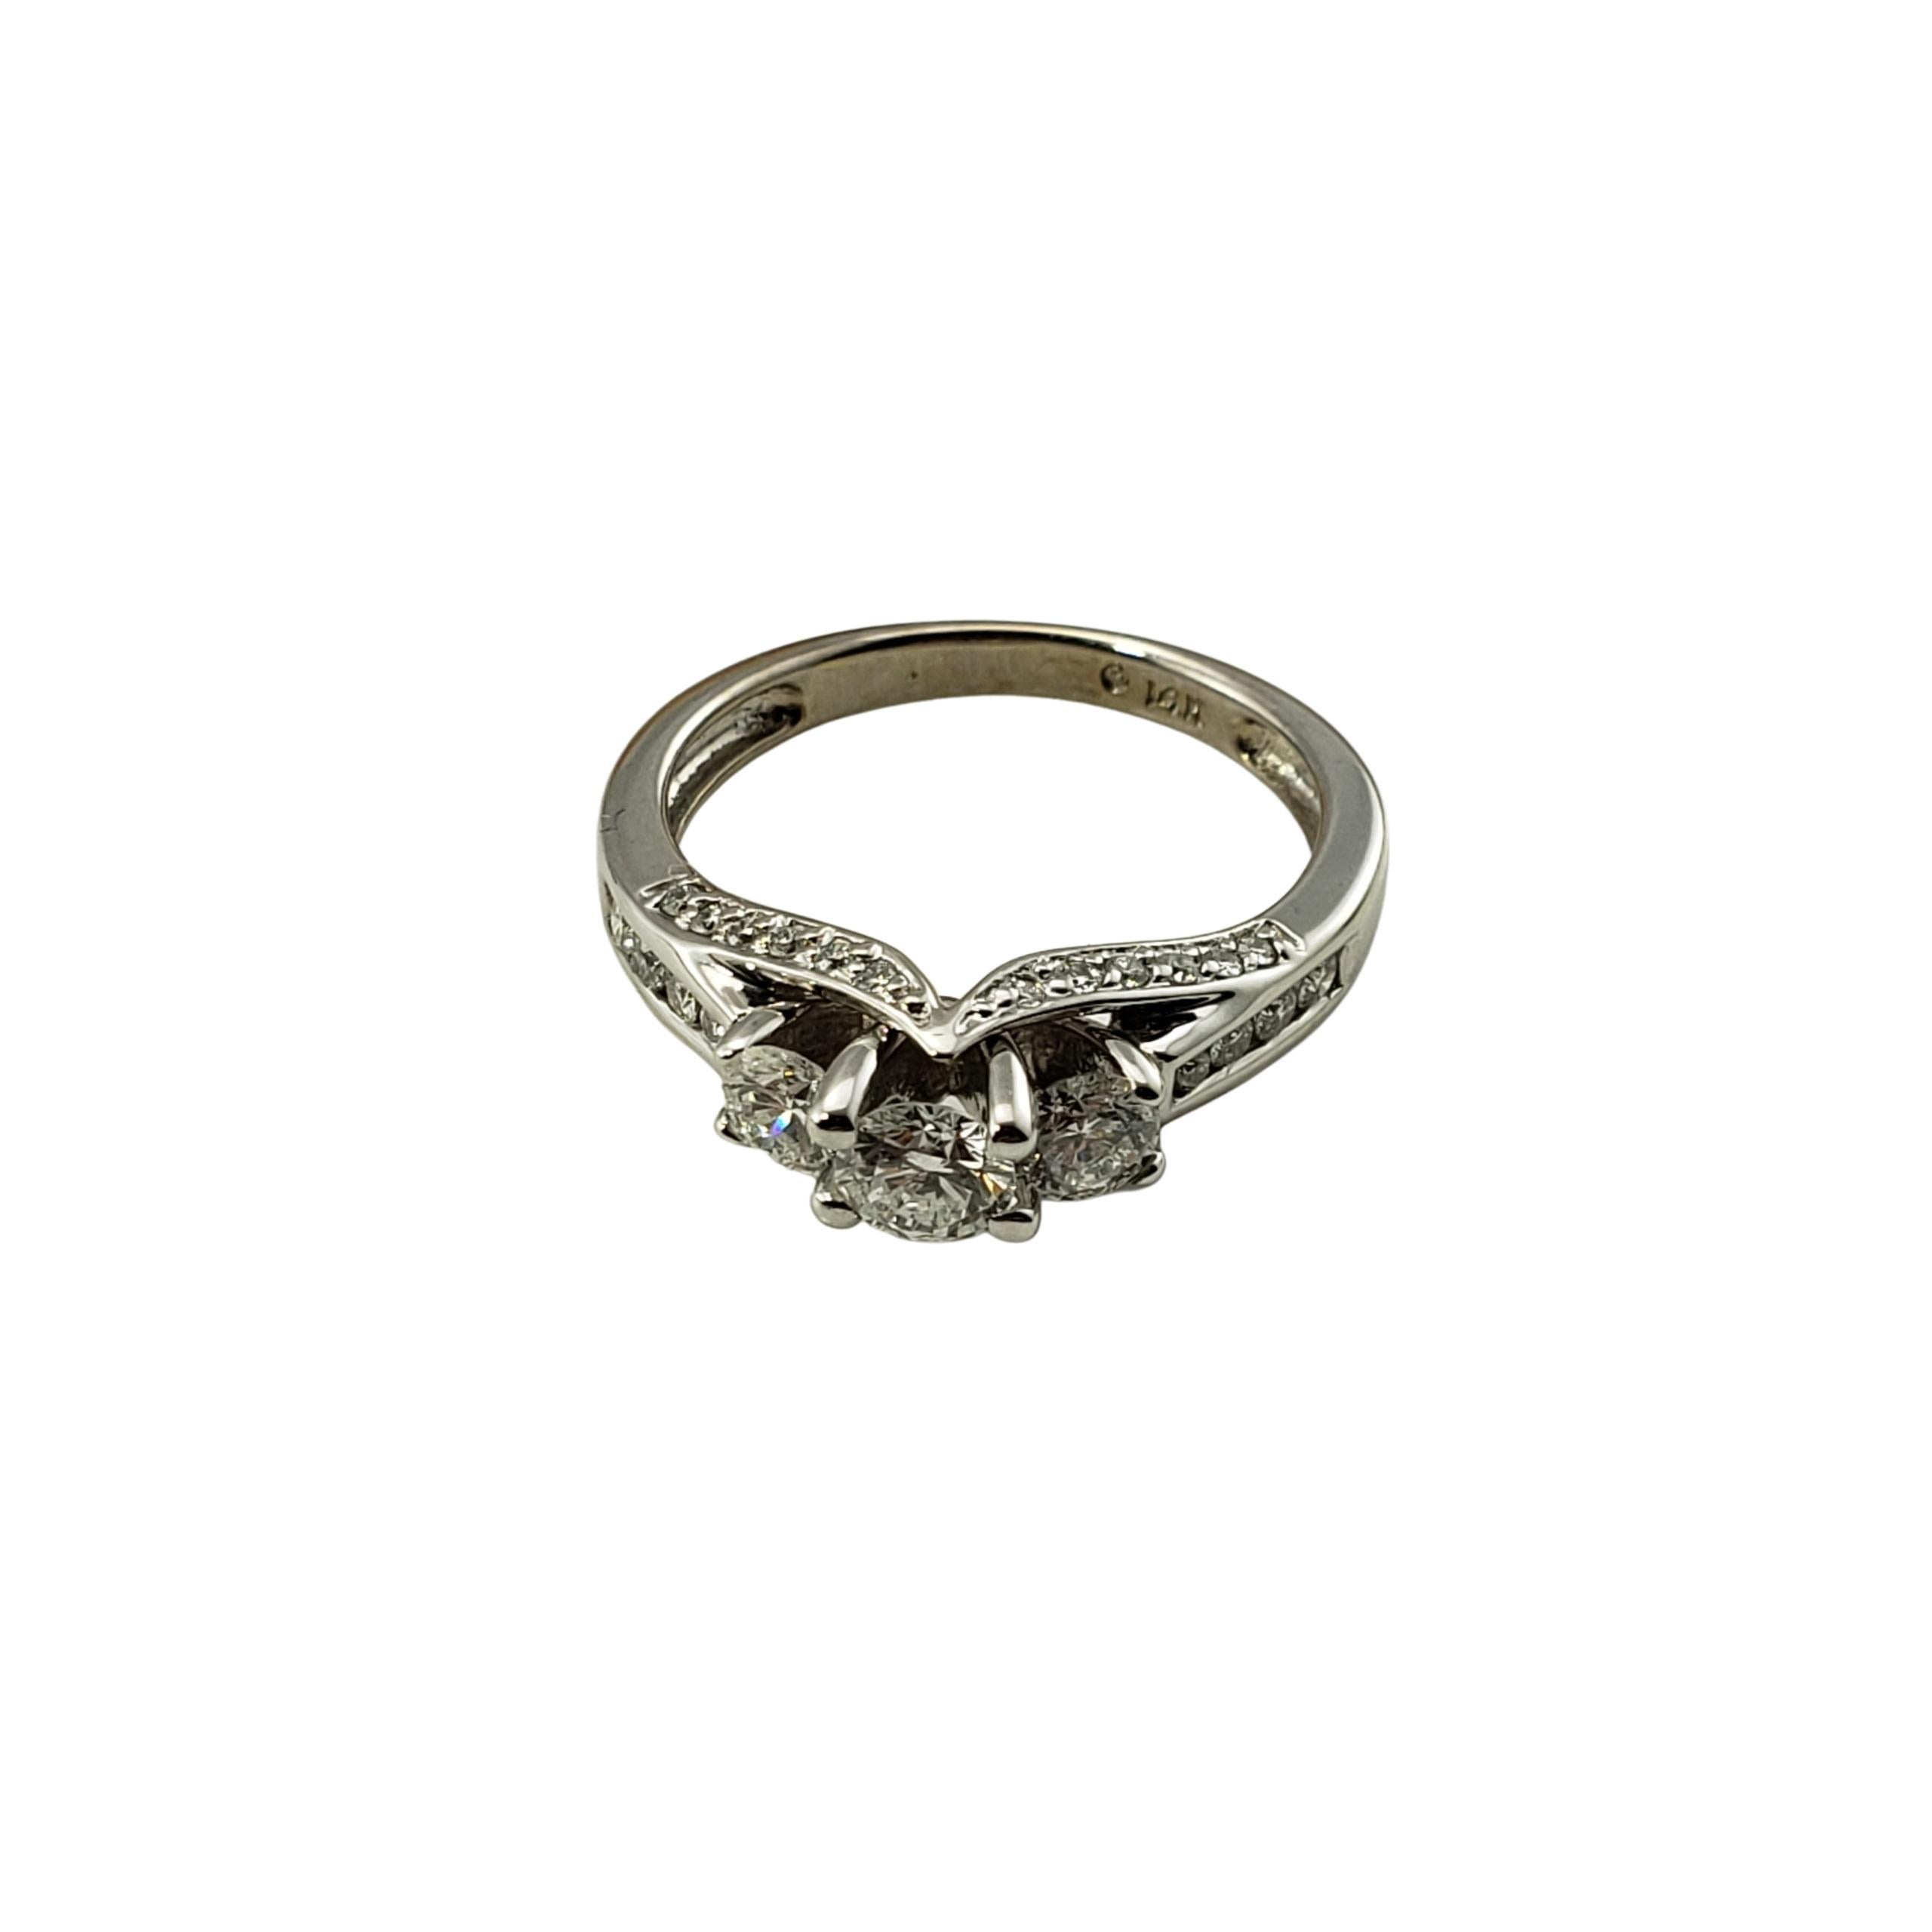 14 Karat White Gold Diamond Engagement Ring Size 7.25-

This sparkling ring features 36 round brilliant cut diamonds (center stone: .40 ct., two side stones: .30 ct. each) set in beautifully detailed 14K white gold.  

Shank:  2 mm.

Approximate